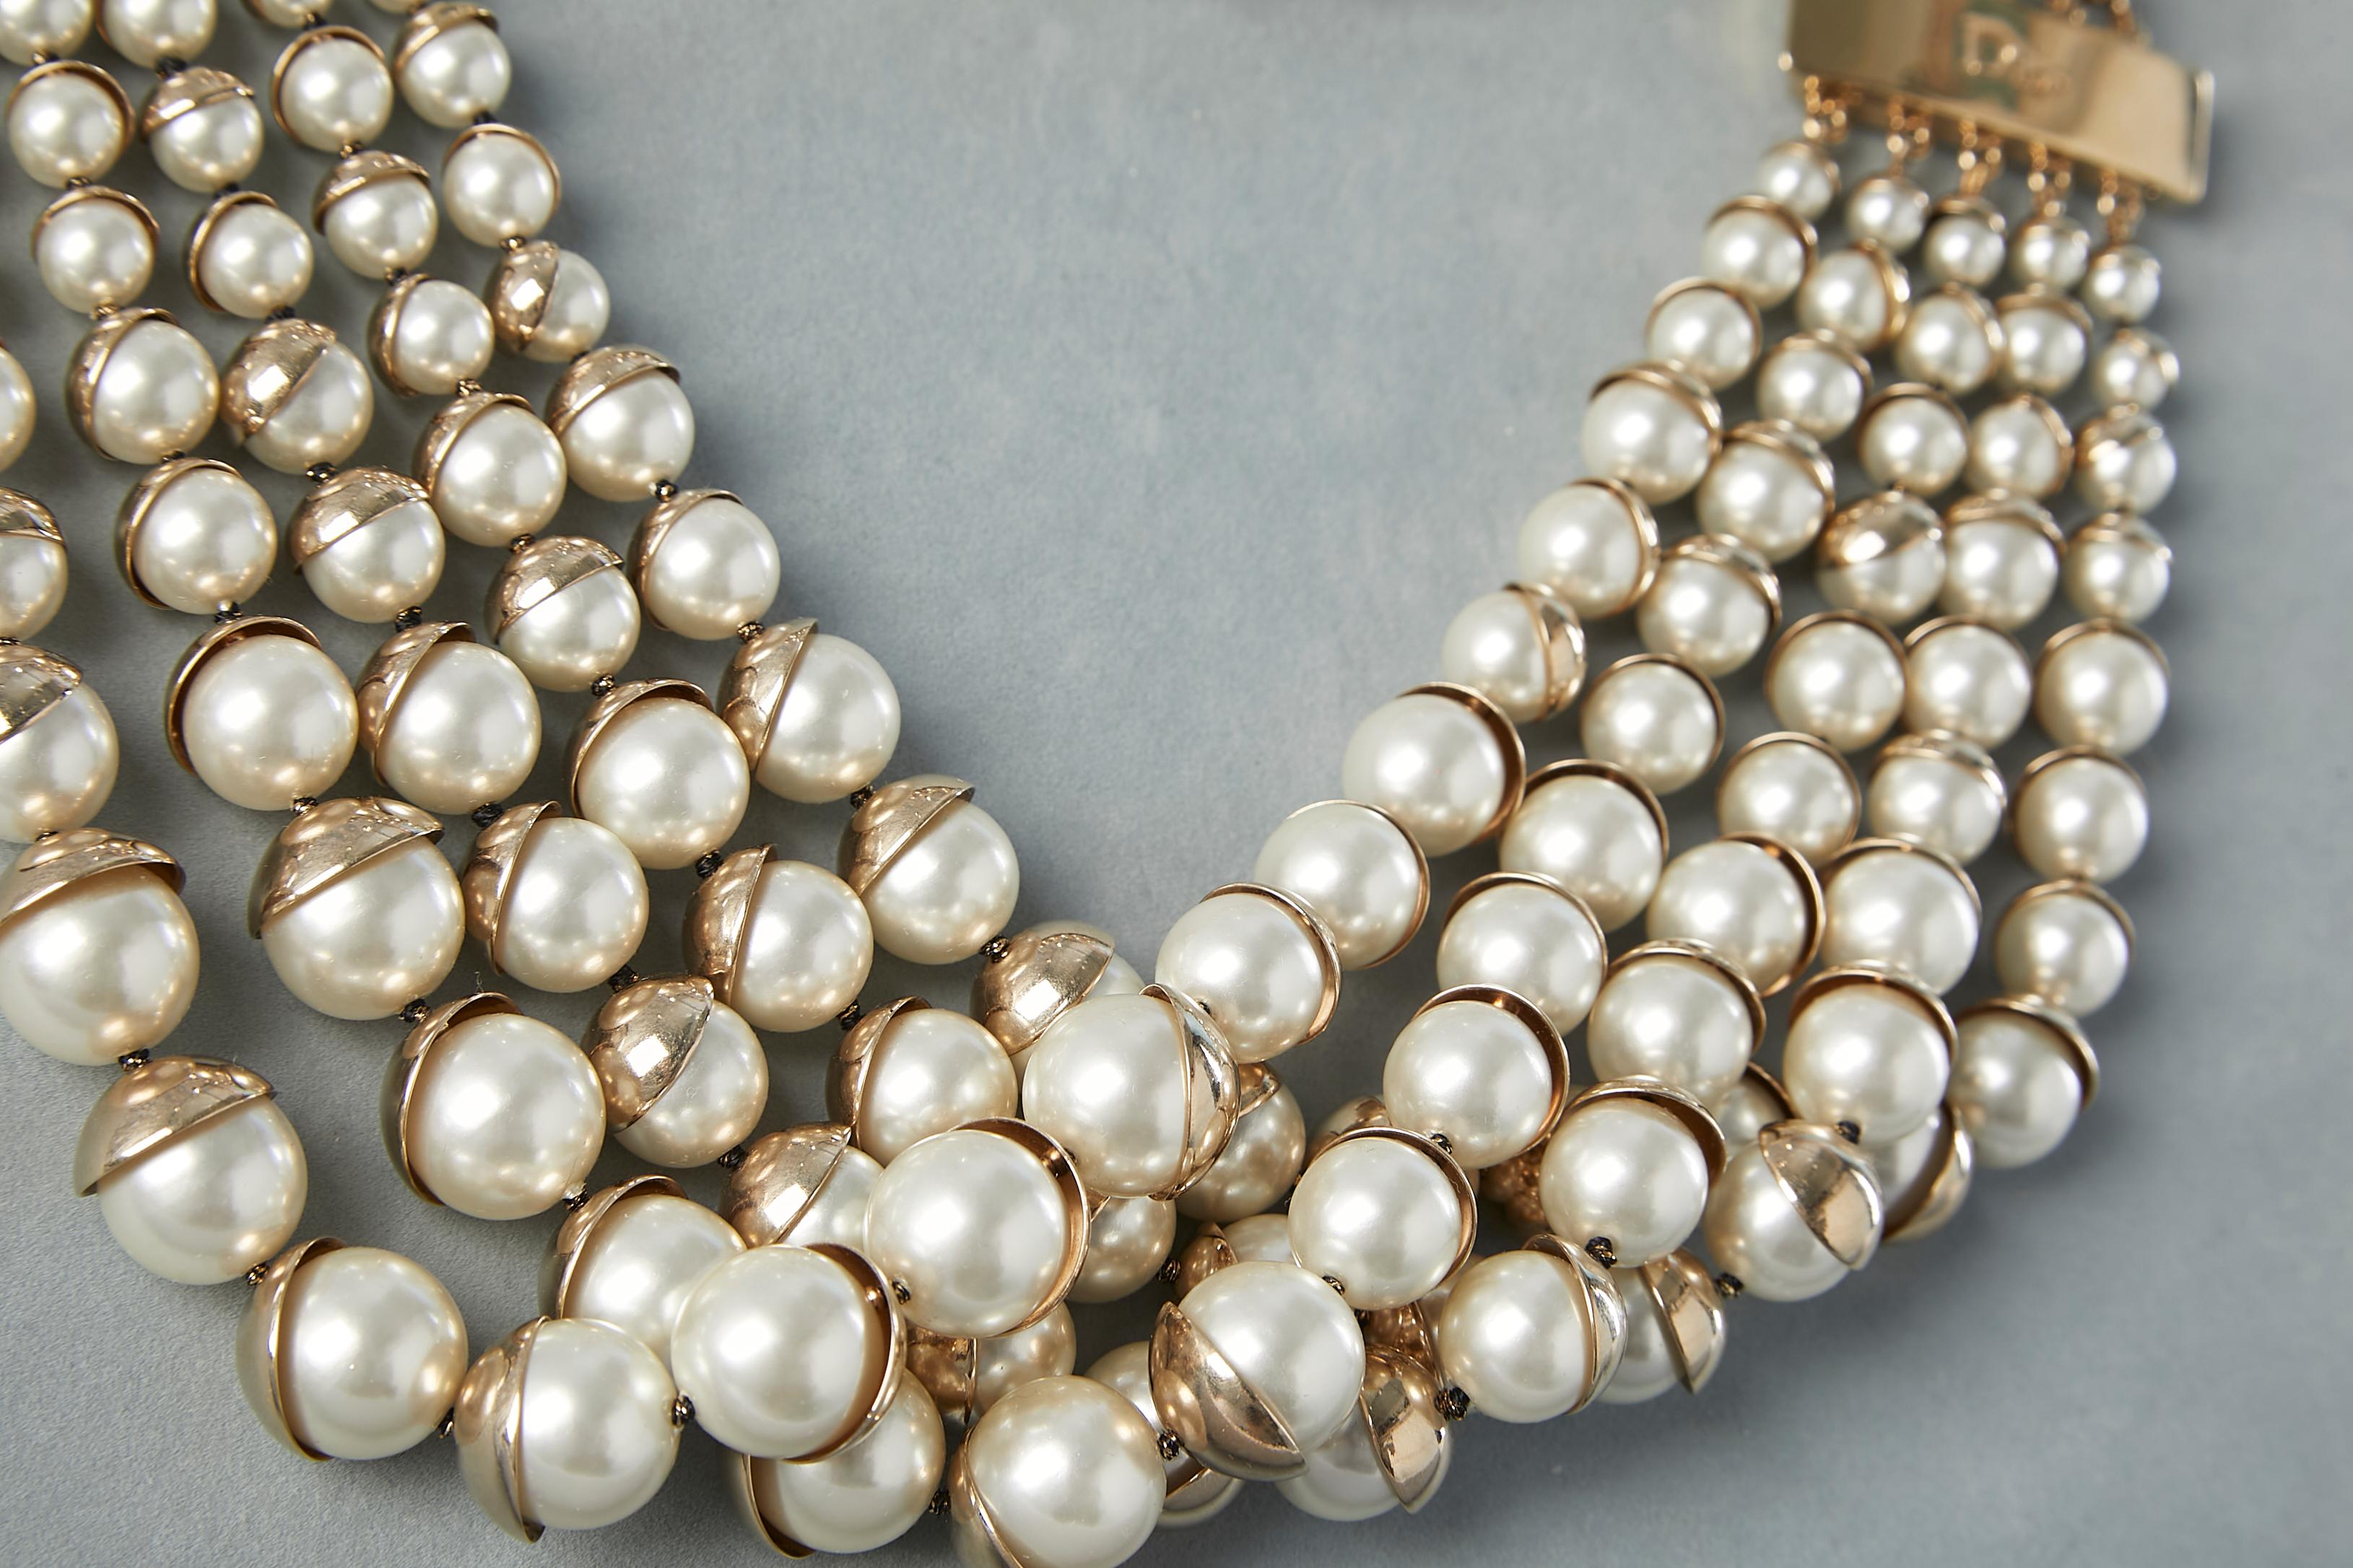 Multi-strand neckless with pearls. Gold metal clasp. Box and case provide.
Diameter = 48 cm